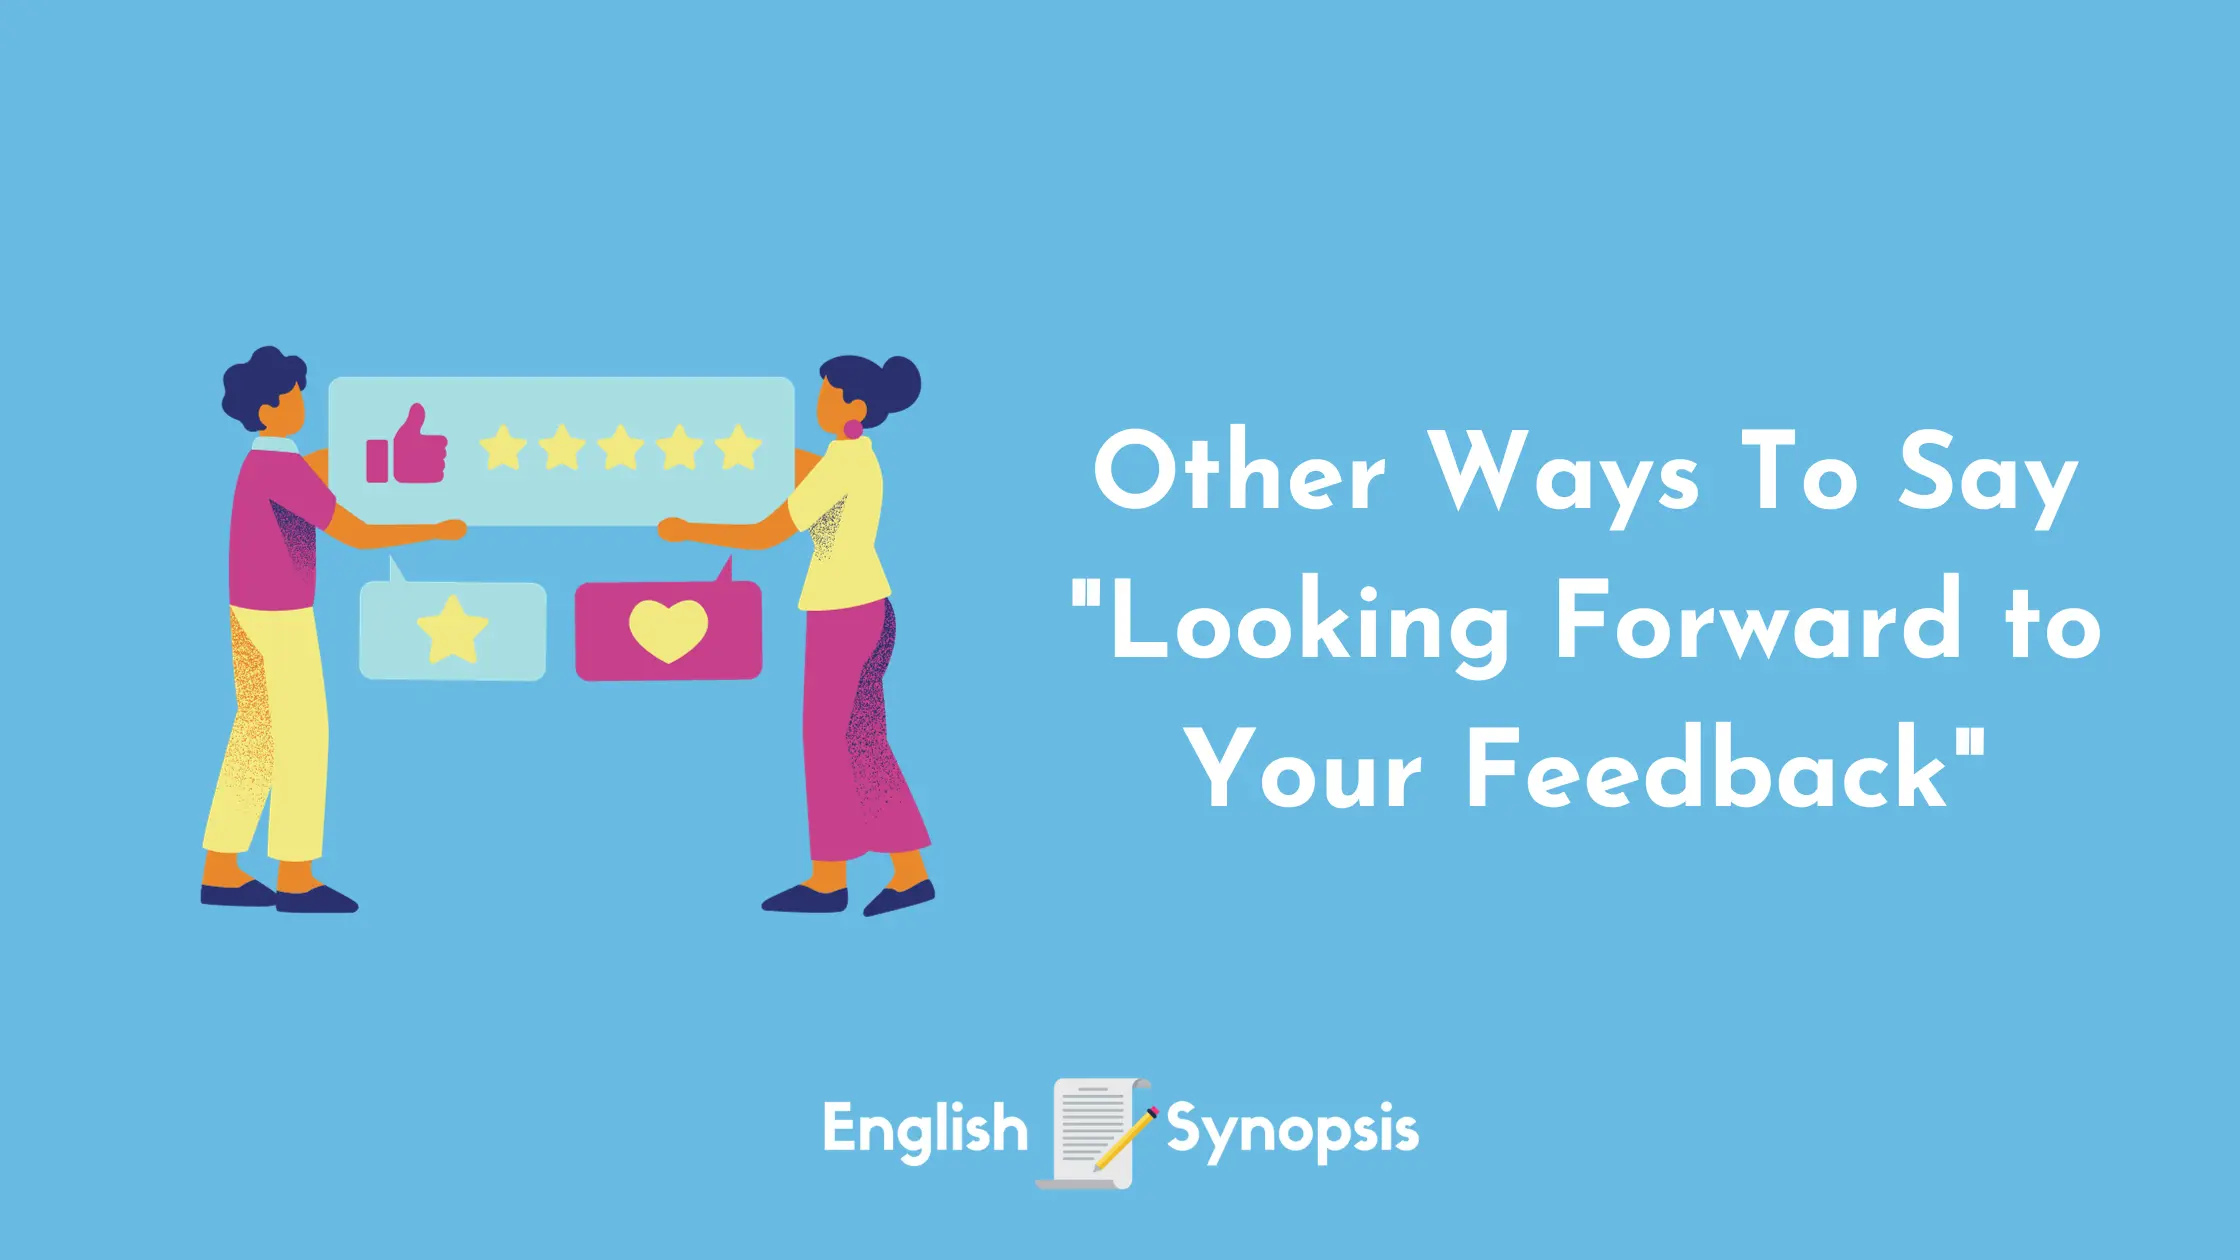 Other Ways To Say "Looking Forward to Your Feedback"